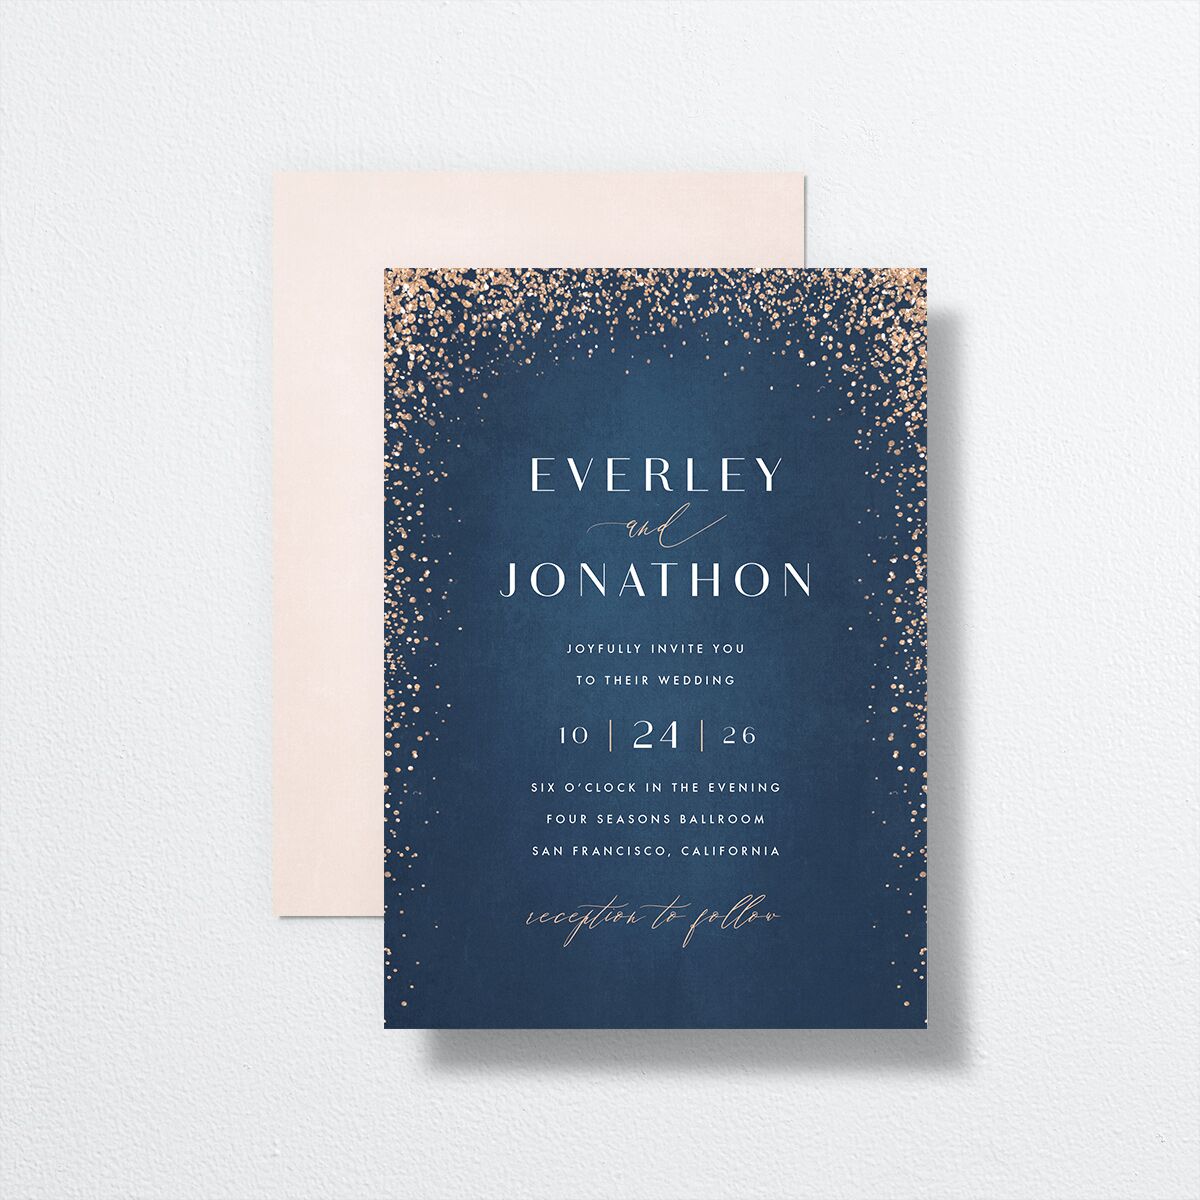 Sparkling Romance Wedding Invitations front-and-back in blue